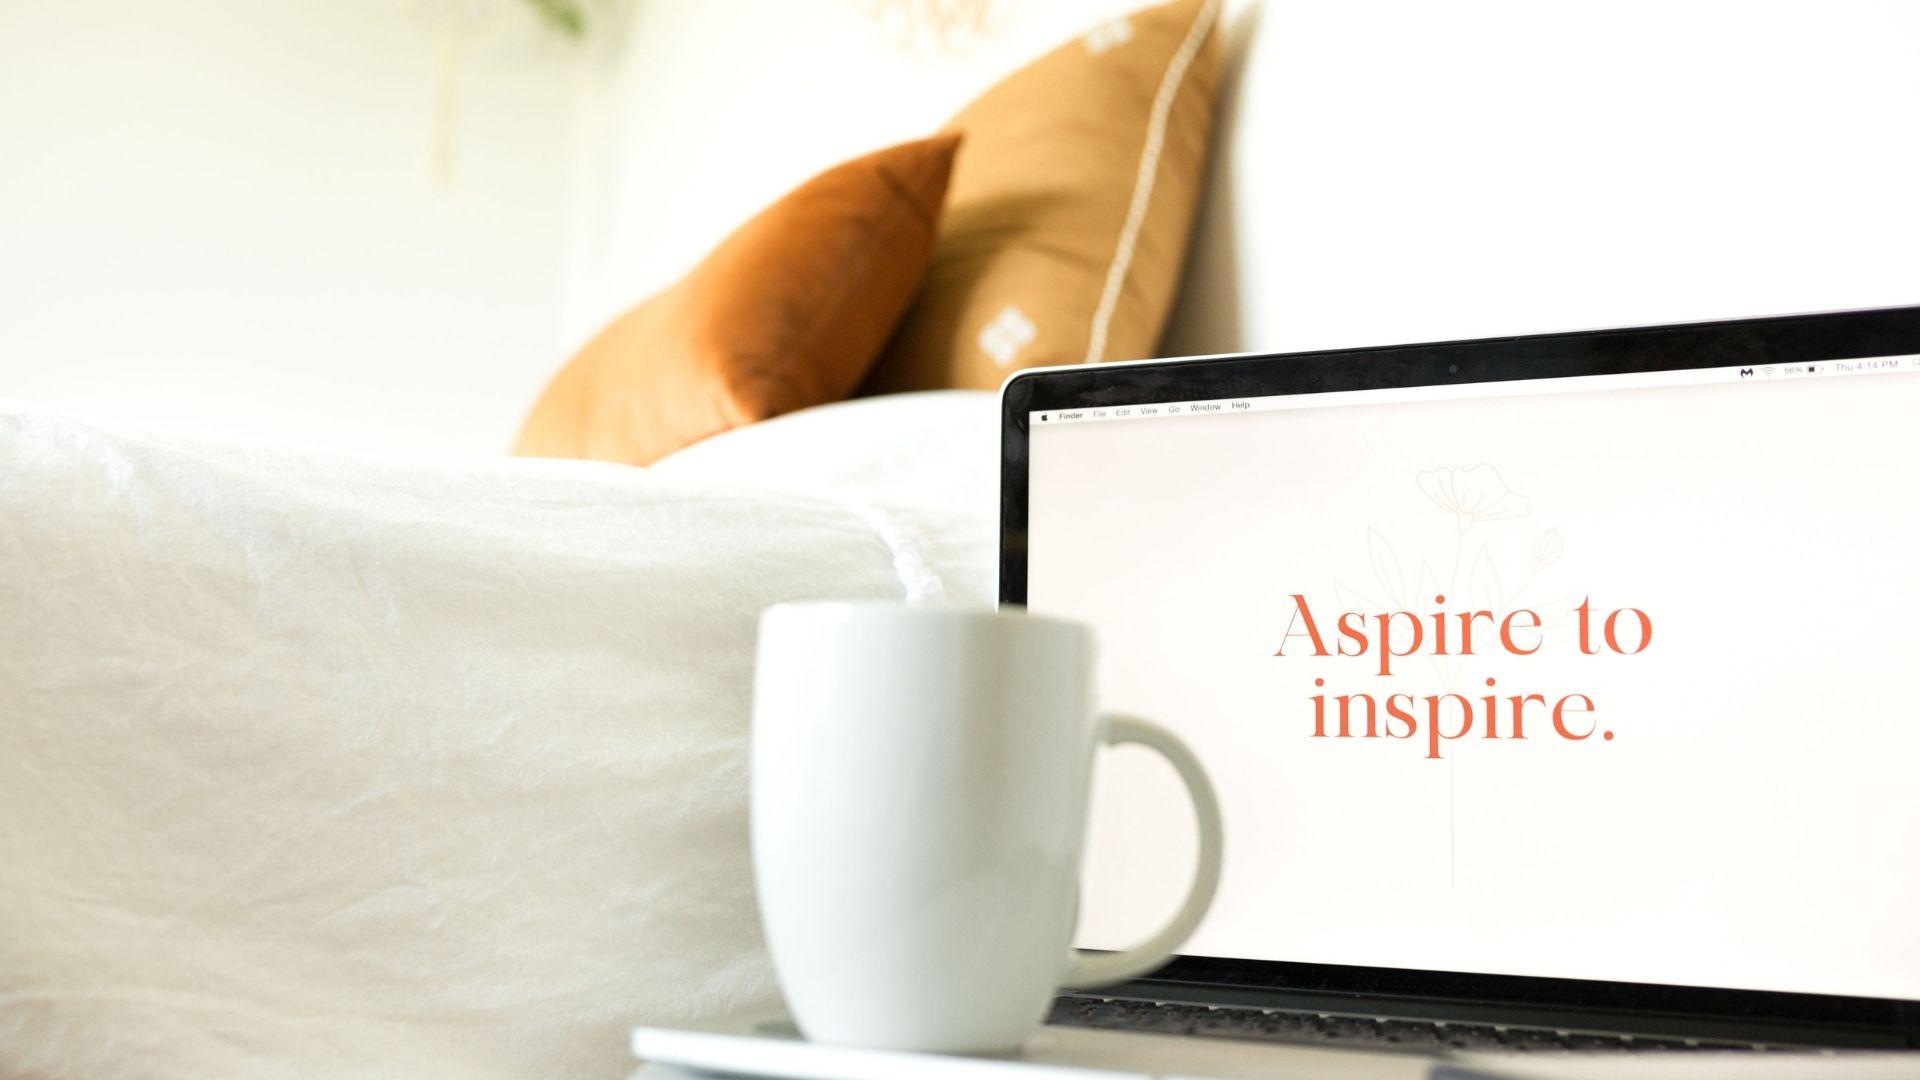 Laptop with an inspirational message: Aspire to Inspire